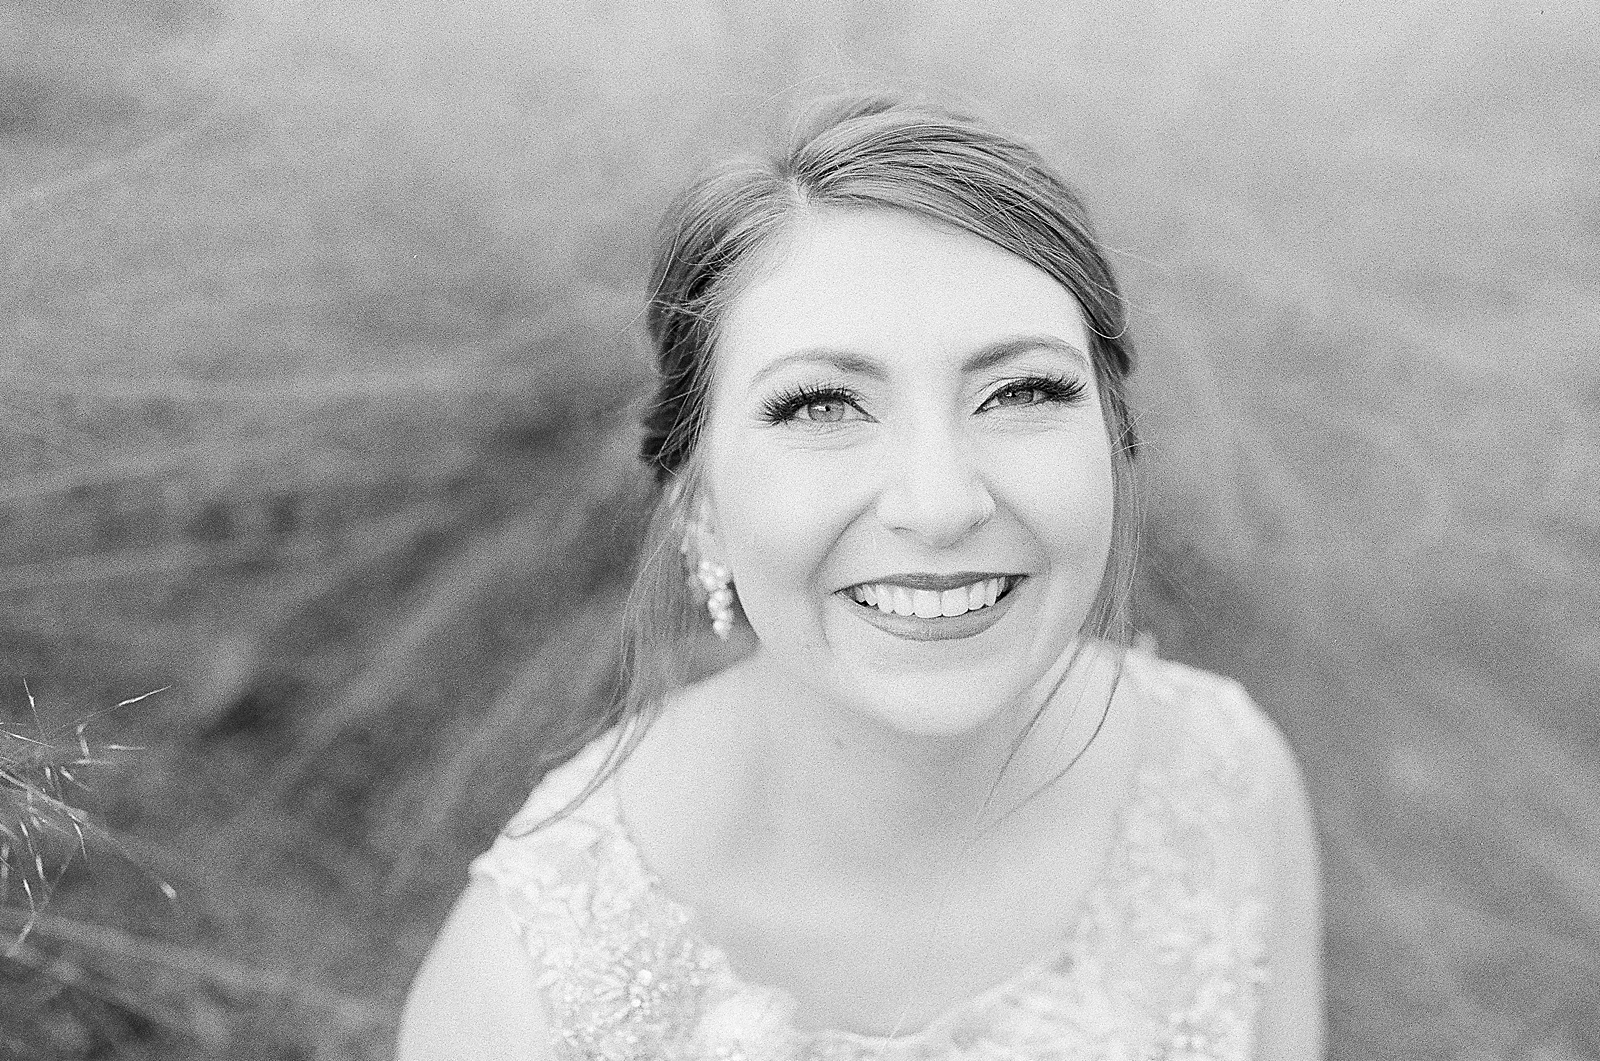 Asheville Bridal Editorial Black and White of Bride Smiling at Camera Photo